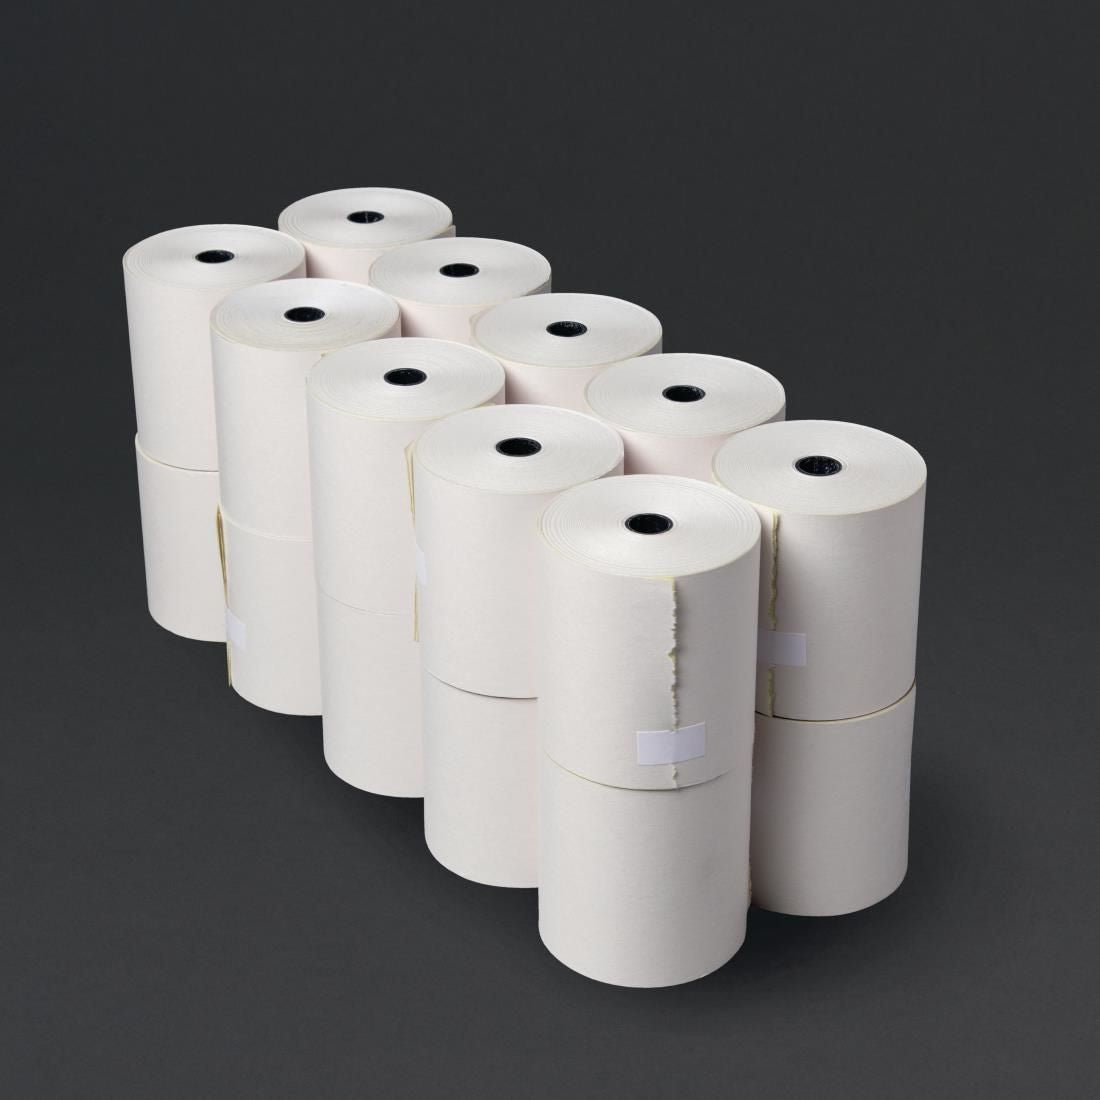 Fiesta Non-Thermal 2ply White and Yellow Till Roll 76 x 70mm (Pack of 20) JD Catering Equipment Solutions Ltd